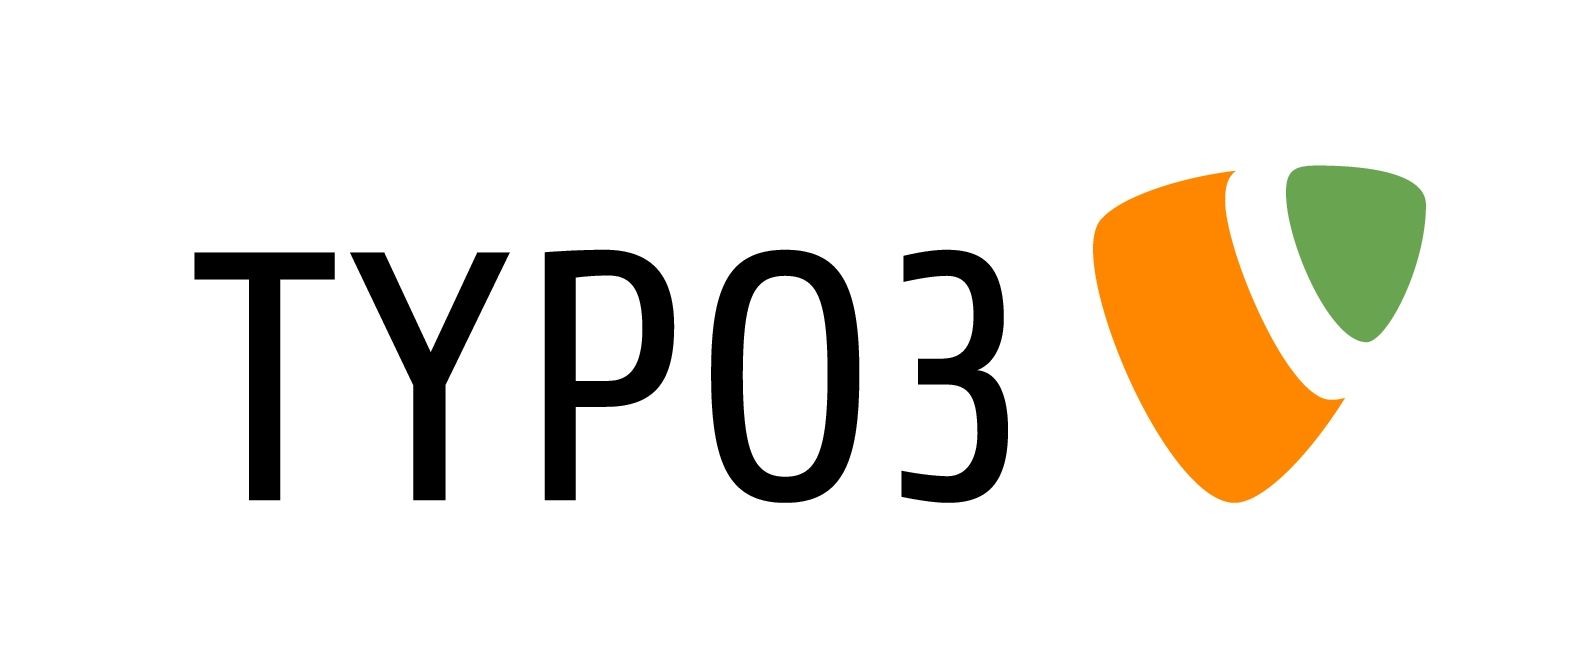 TYPO3 releases a slew of updates